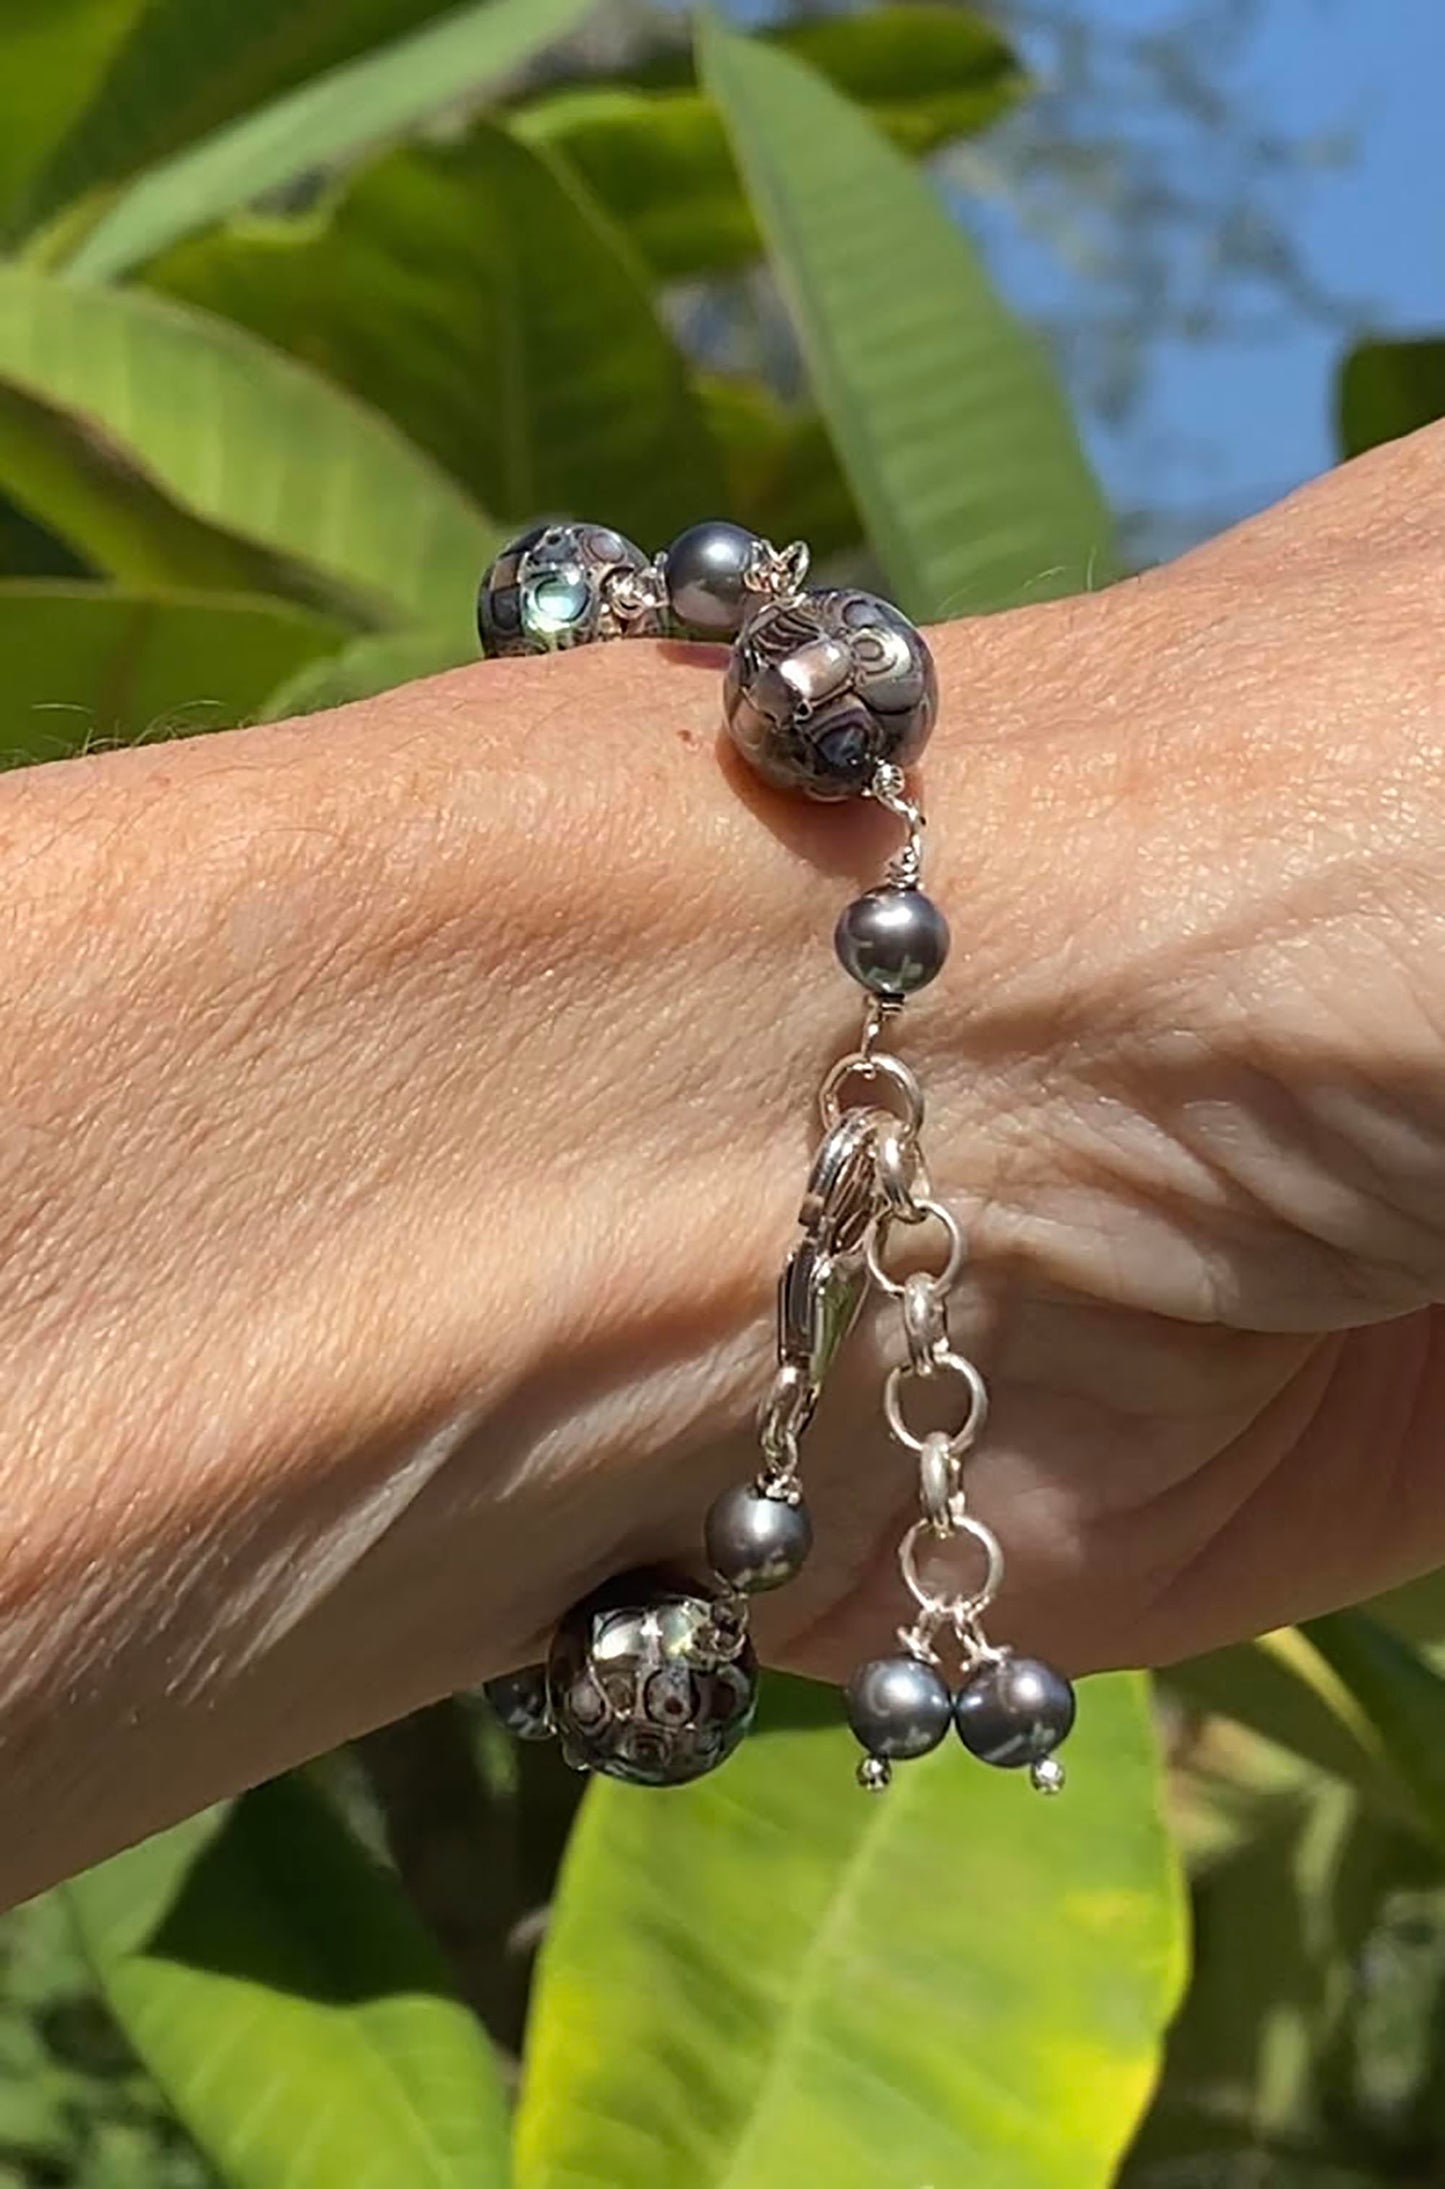 Black Abalone Mosaic Inlay Beaded Bracelet with Tiny Black Pearls and Sterling Silver